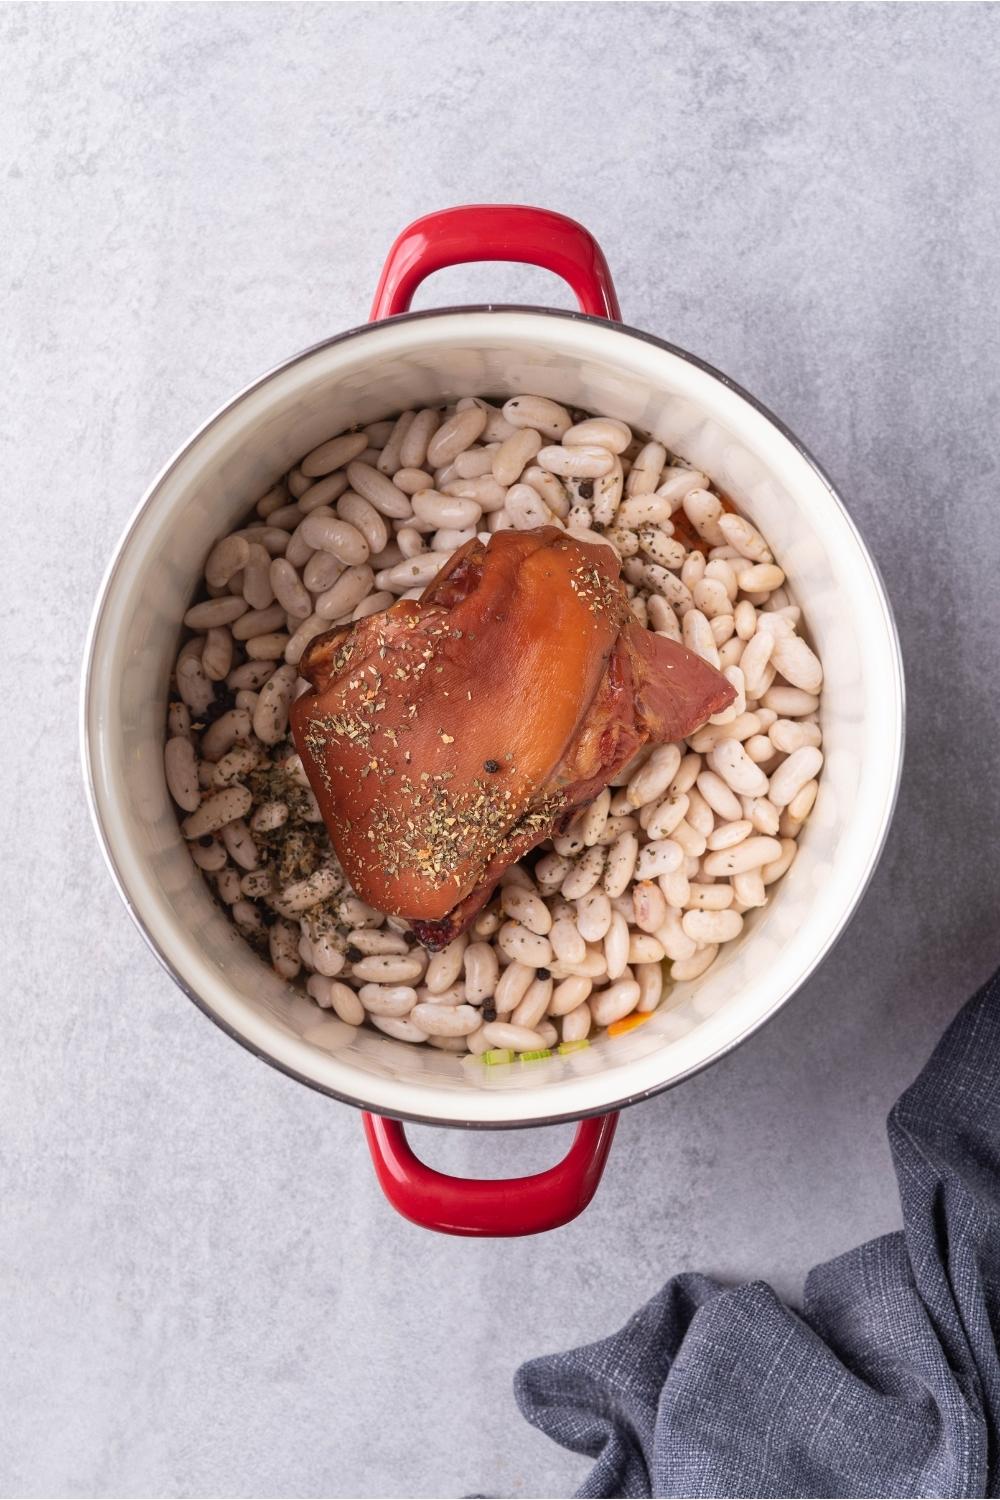 A soup pot with uncooked ham hock and uncooked navy beans in the pot.